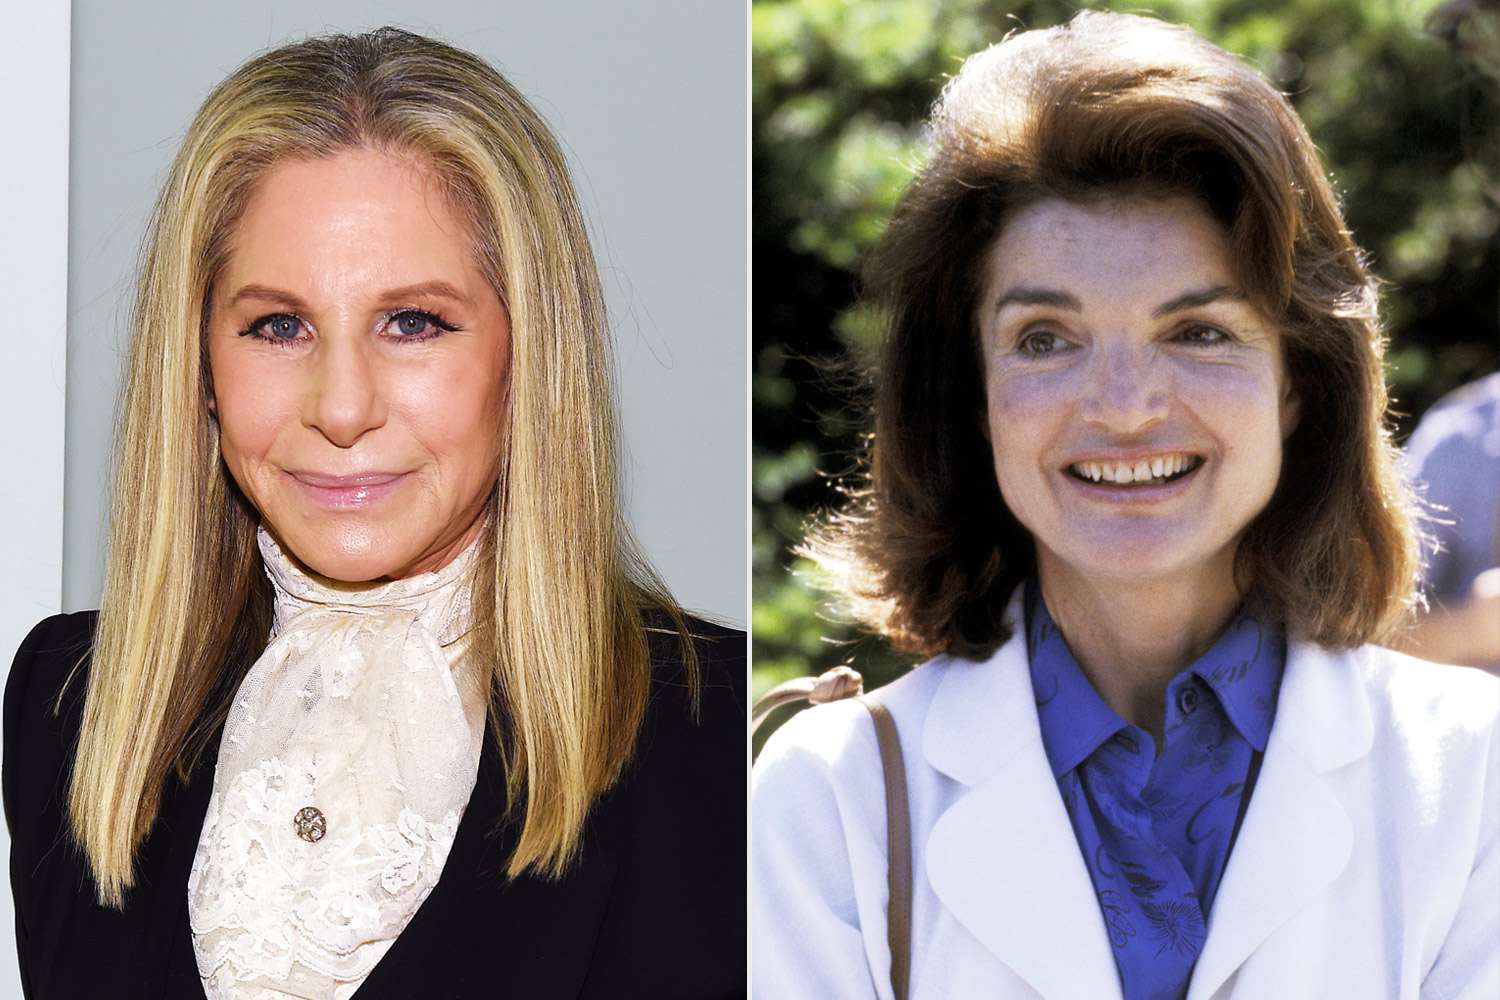 Barbra Streisand Says Jackie Kennedy Once Offered Edit Her Memoir — But the Singer Never Wrote One